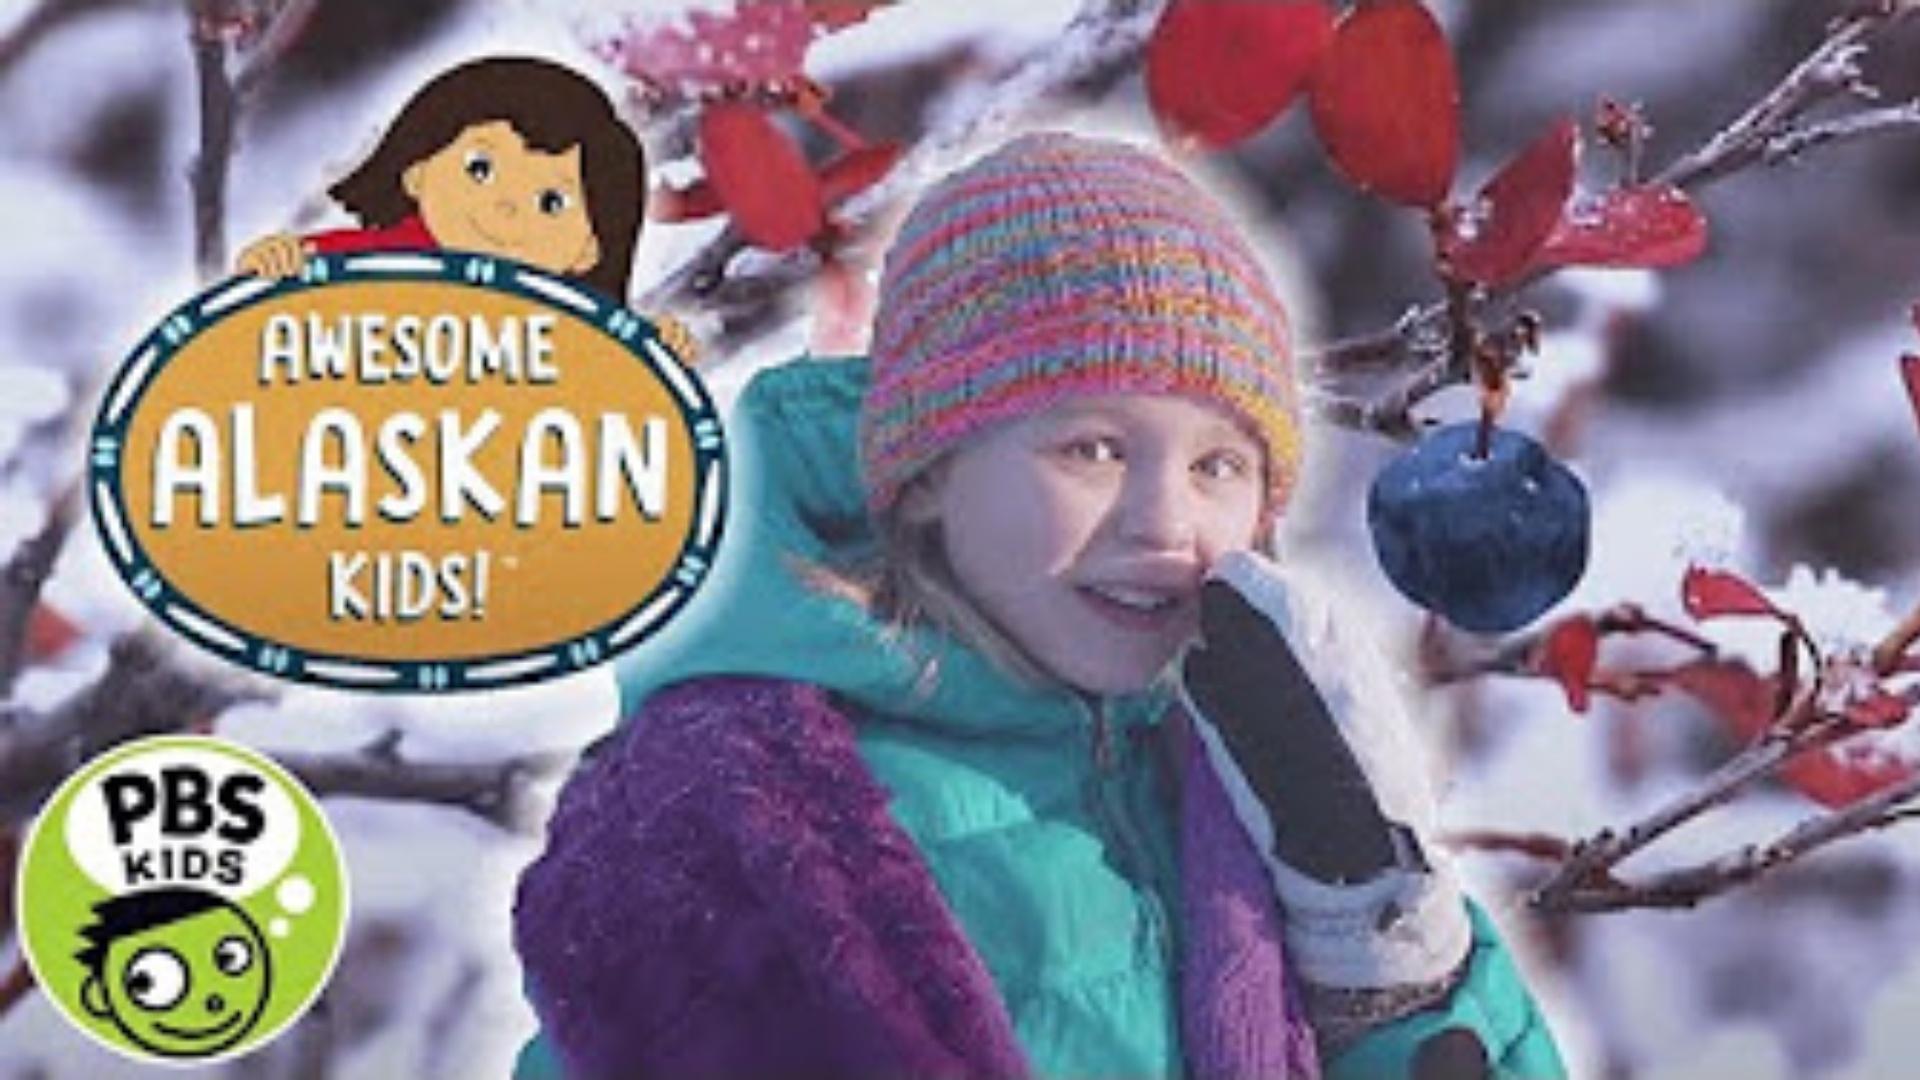 Molly of Denali's Awesome Alaskan Kids with the PBS KIDS logo and the background image of a little kid in some winter bushes.